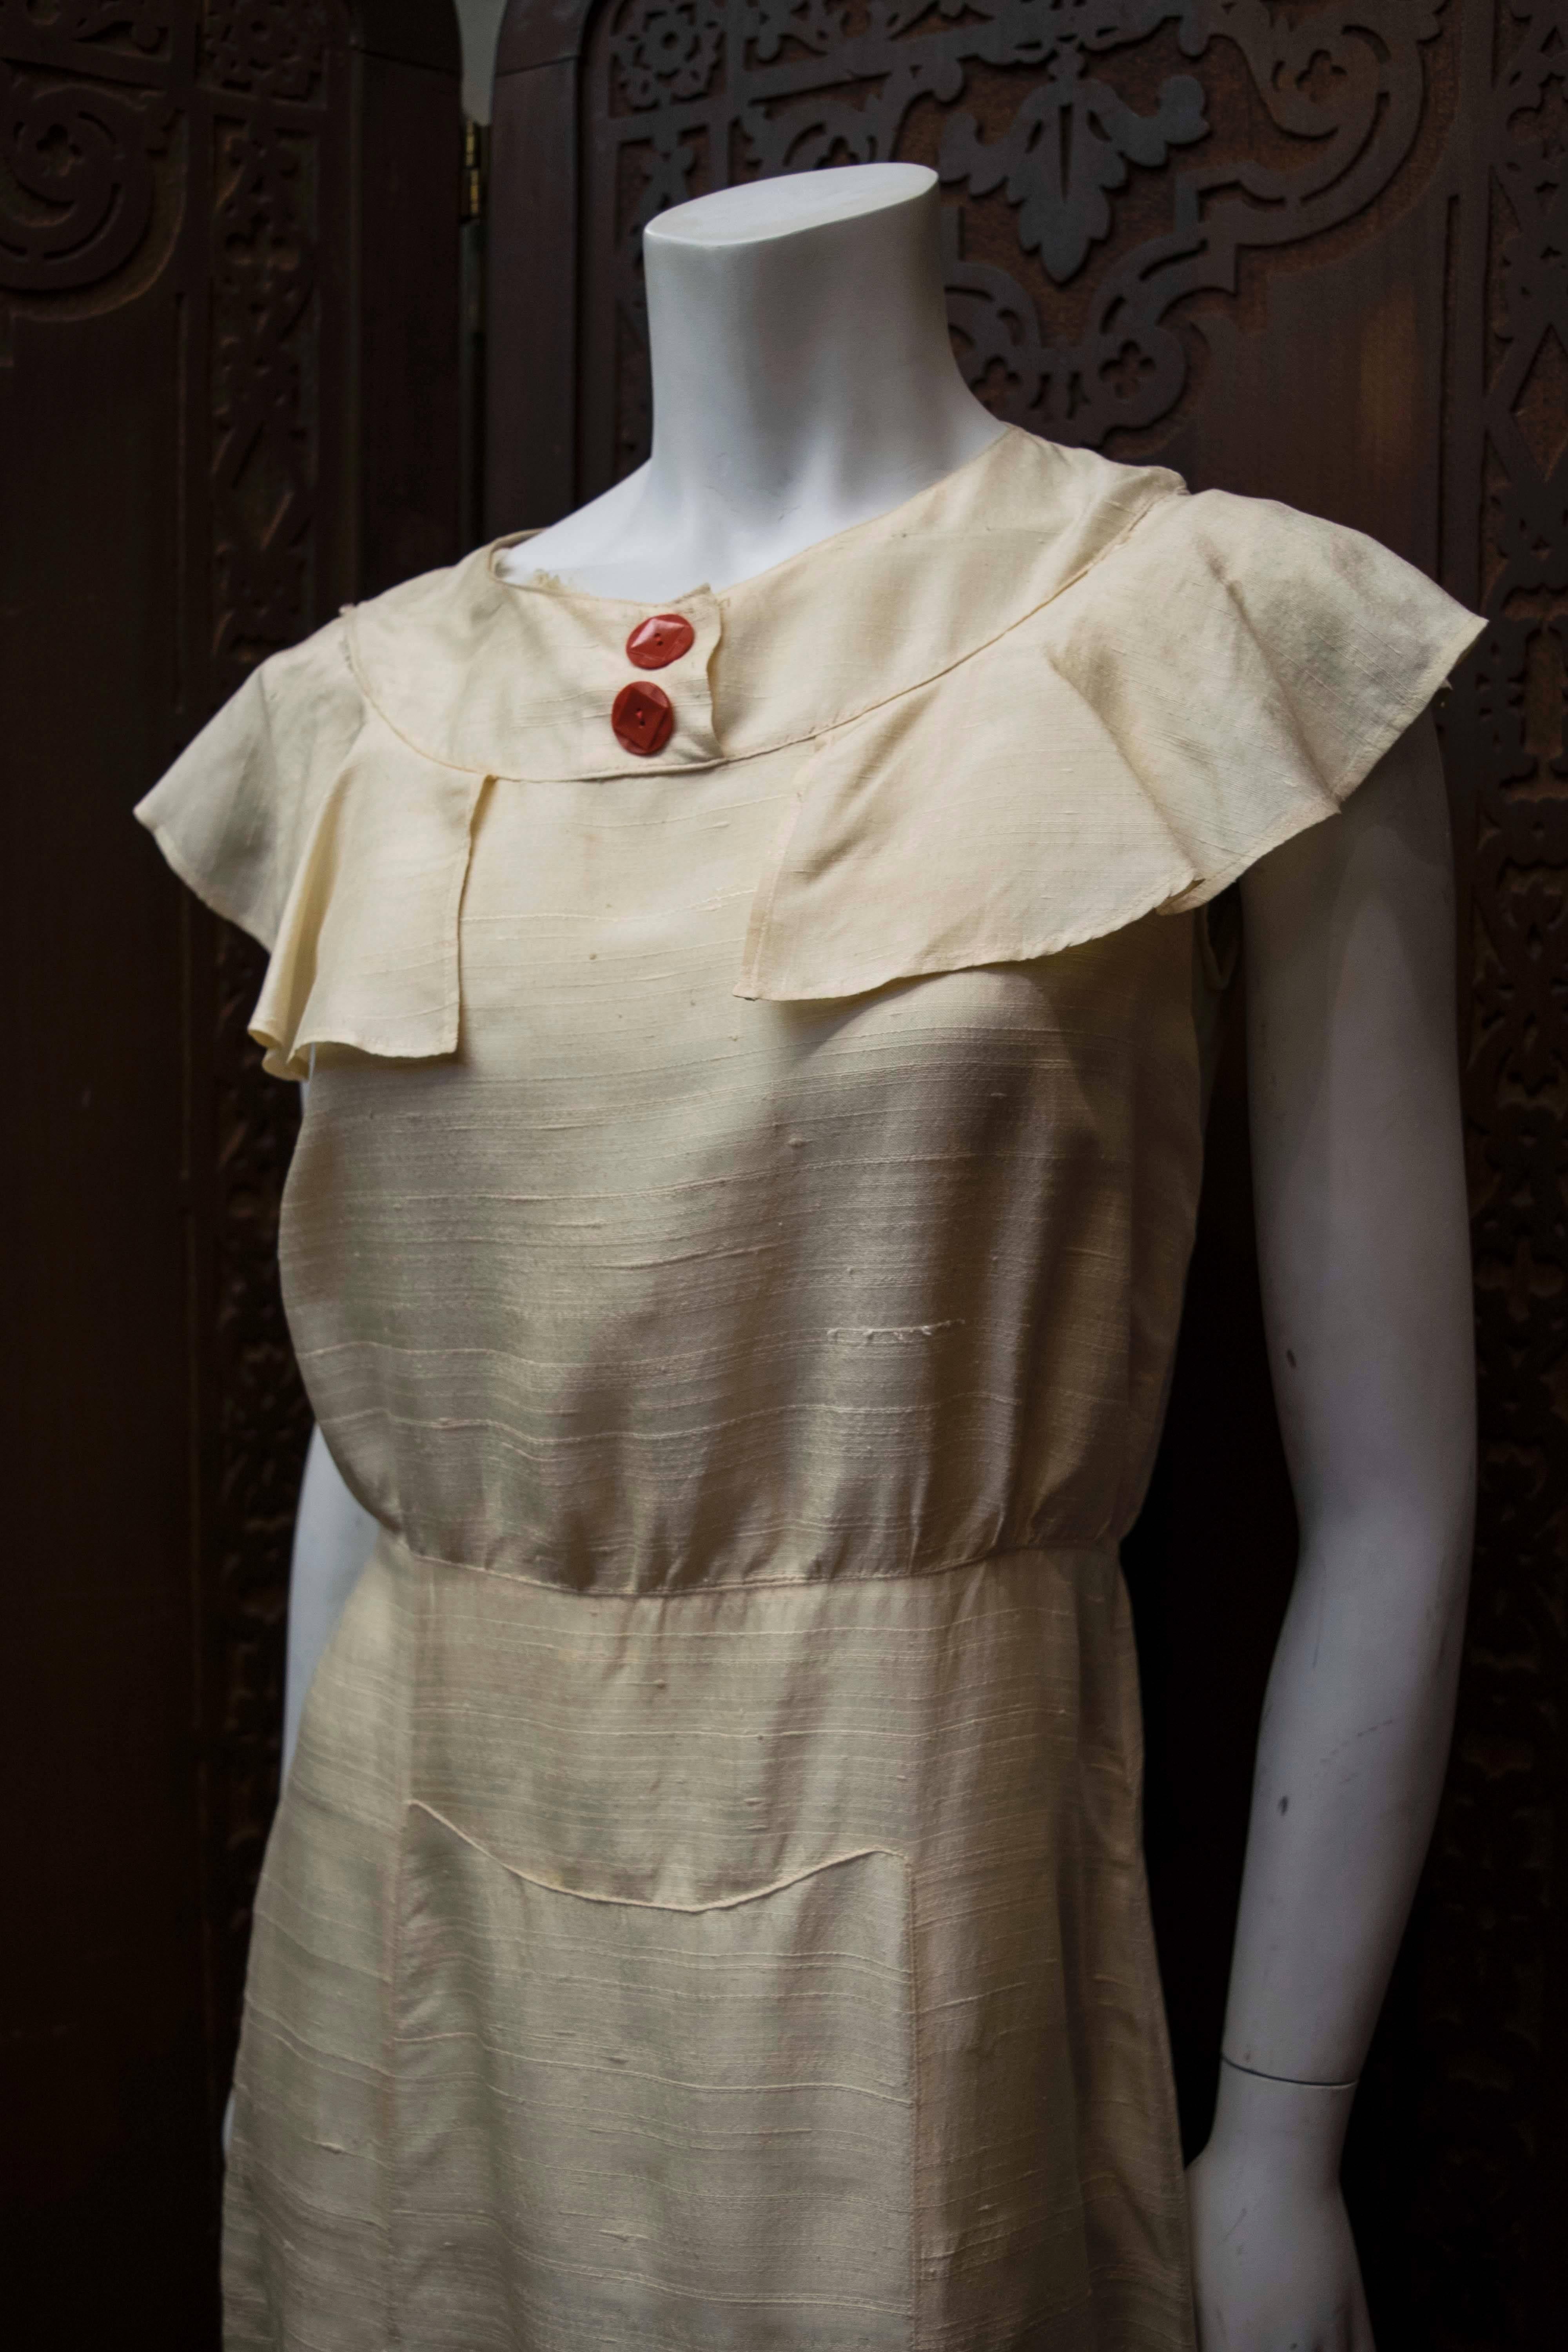 Late 1920s Raw Cream Silk Dress

Stunning dress circa 1929/1930, made from raw silk and featuring red bakelite buttons. Completely wearable.  

B 38
W 30
H 40
L 49